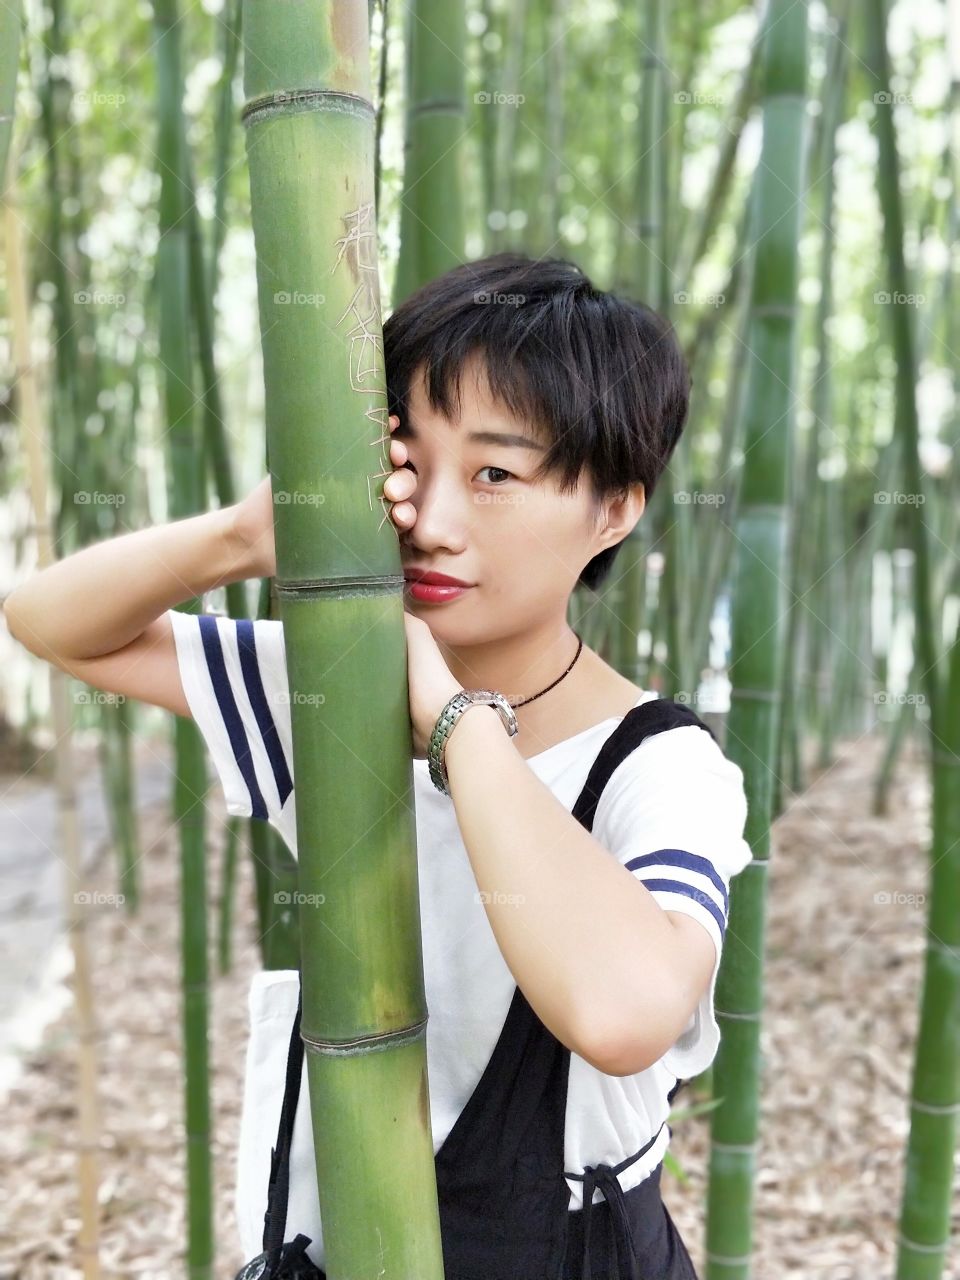 bamboo forest

